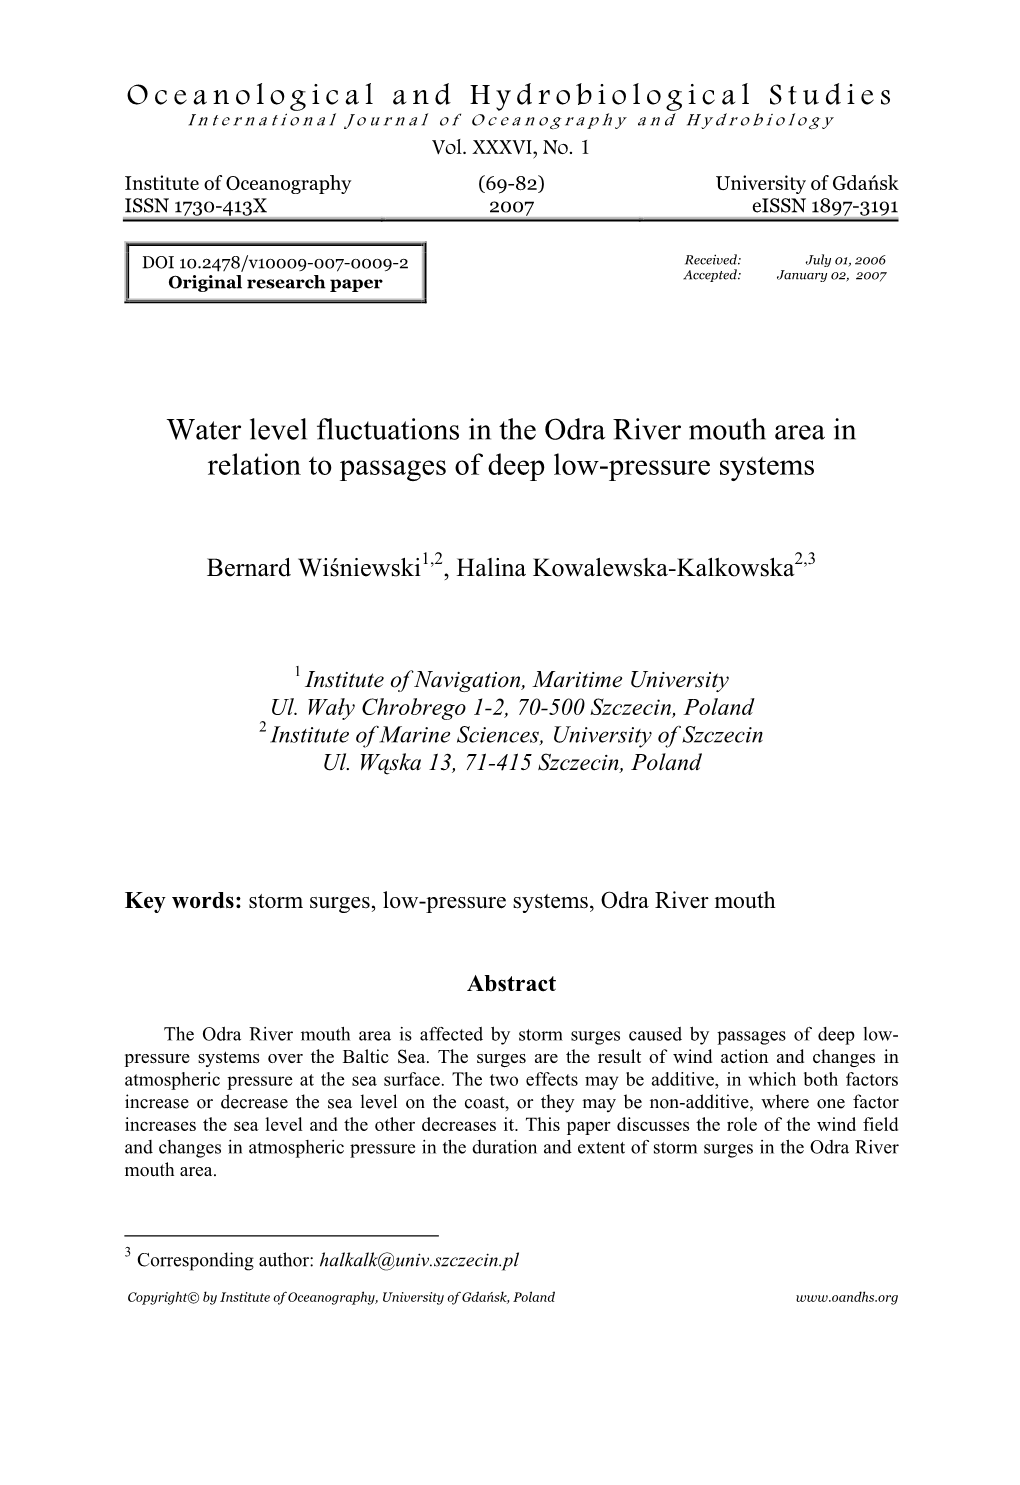 Oceanological and Hydrobiological Studies Water Level Fluctuations in the Odra River Mouth Area in Relation to Passages of Deep